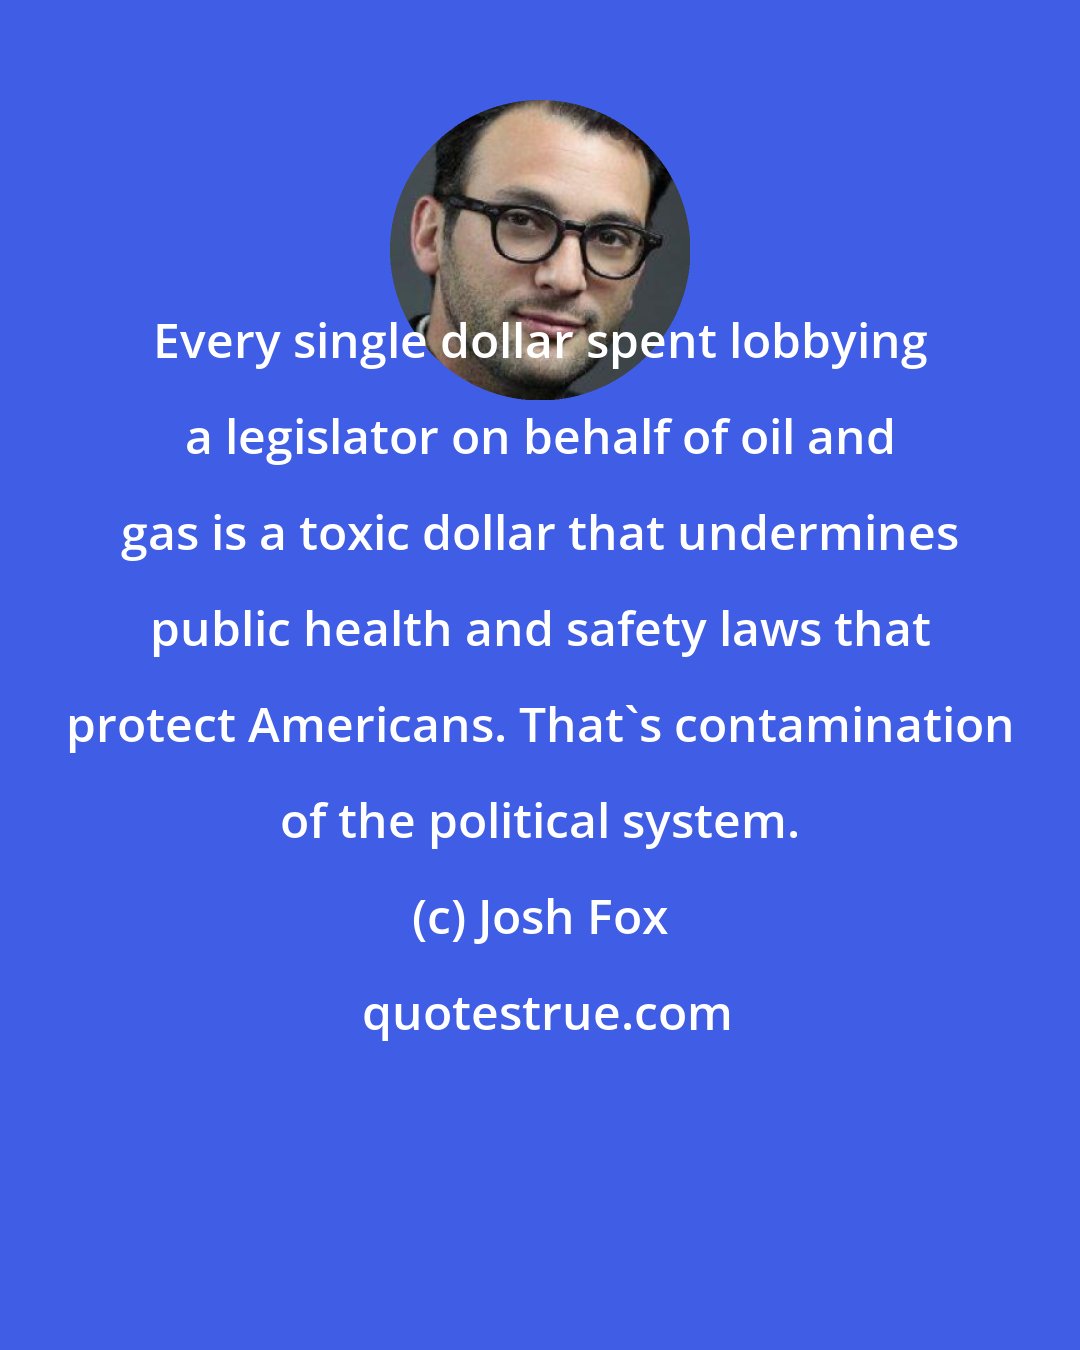 Josh Fox: Every single dollar spent lobbying a legislator on behalf of oil and gas is a toxic dollar that undermines public health and safety laws that protect Americans. That's contamination of the political system.